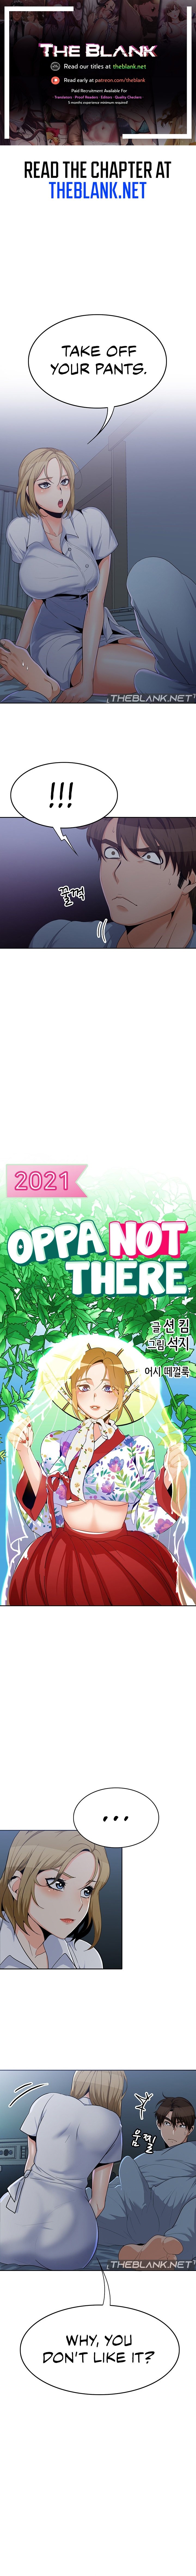 oppa-not-there-chap-13-0